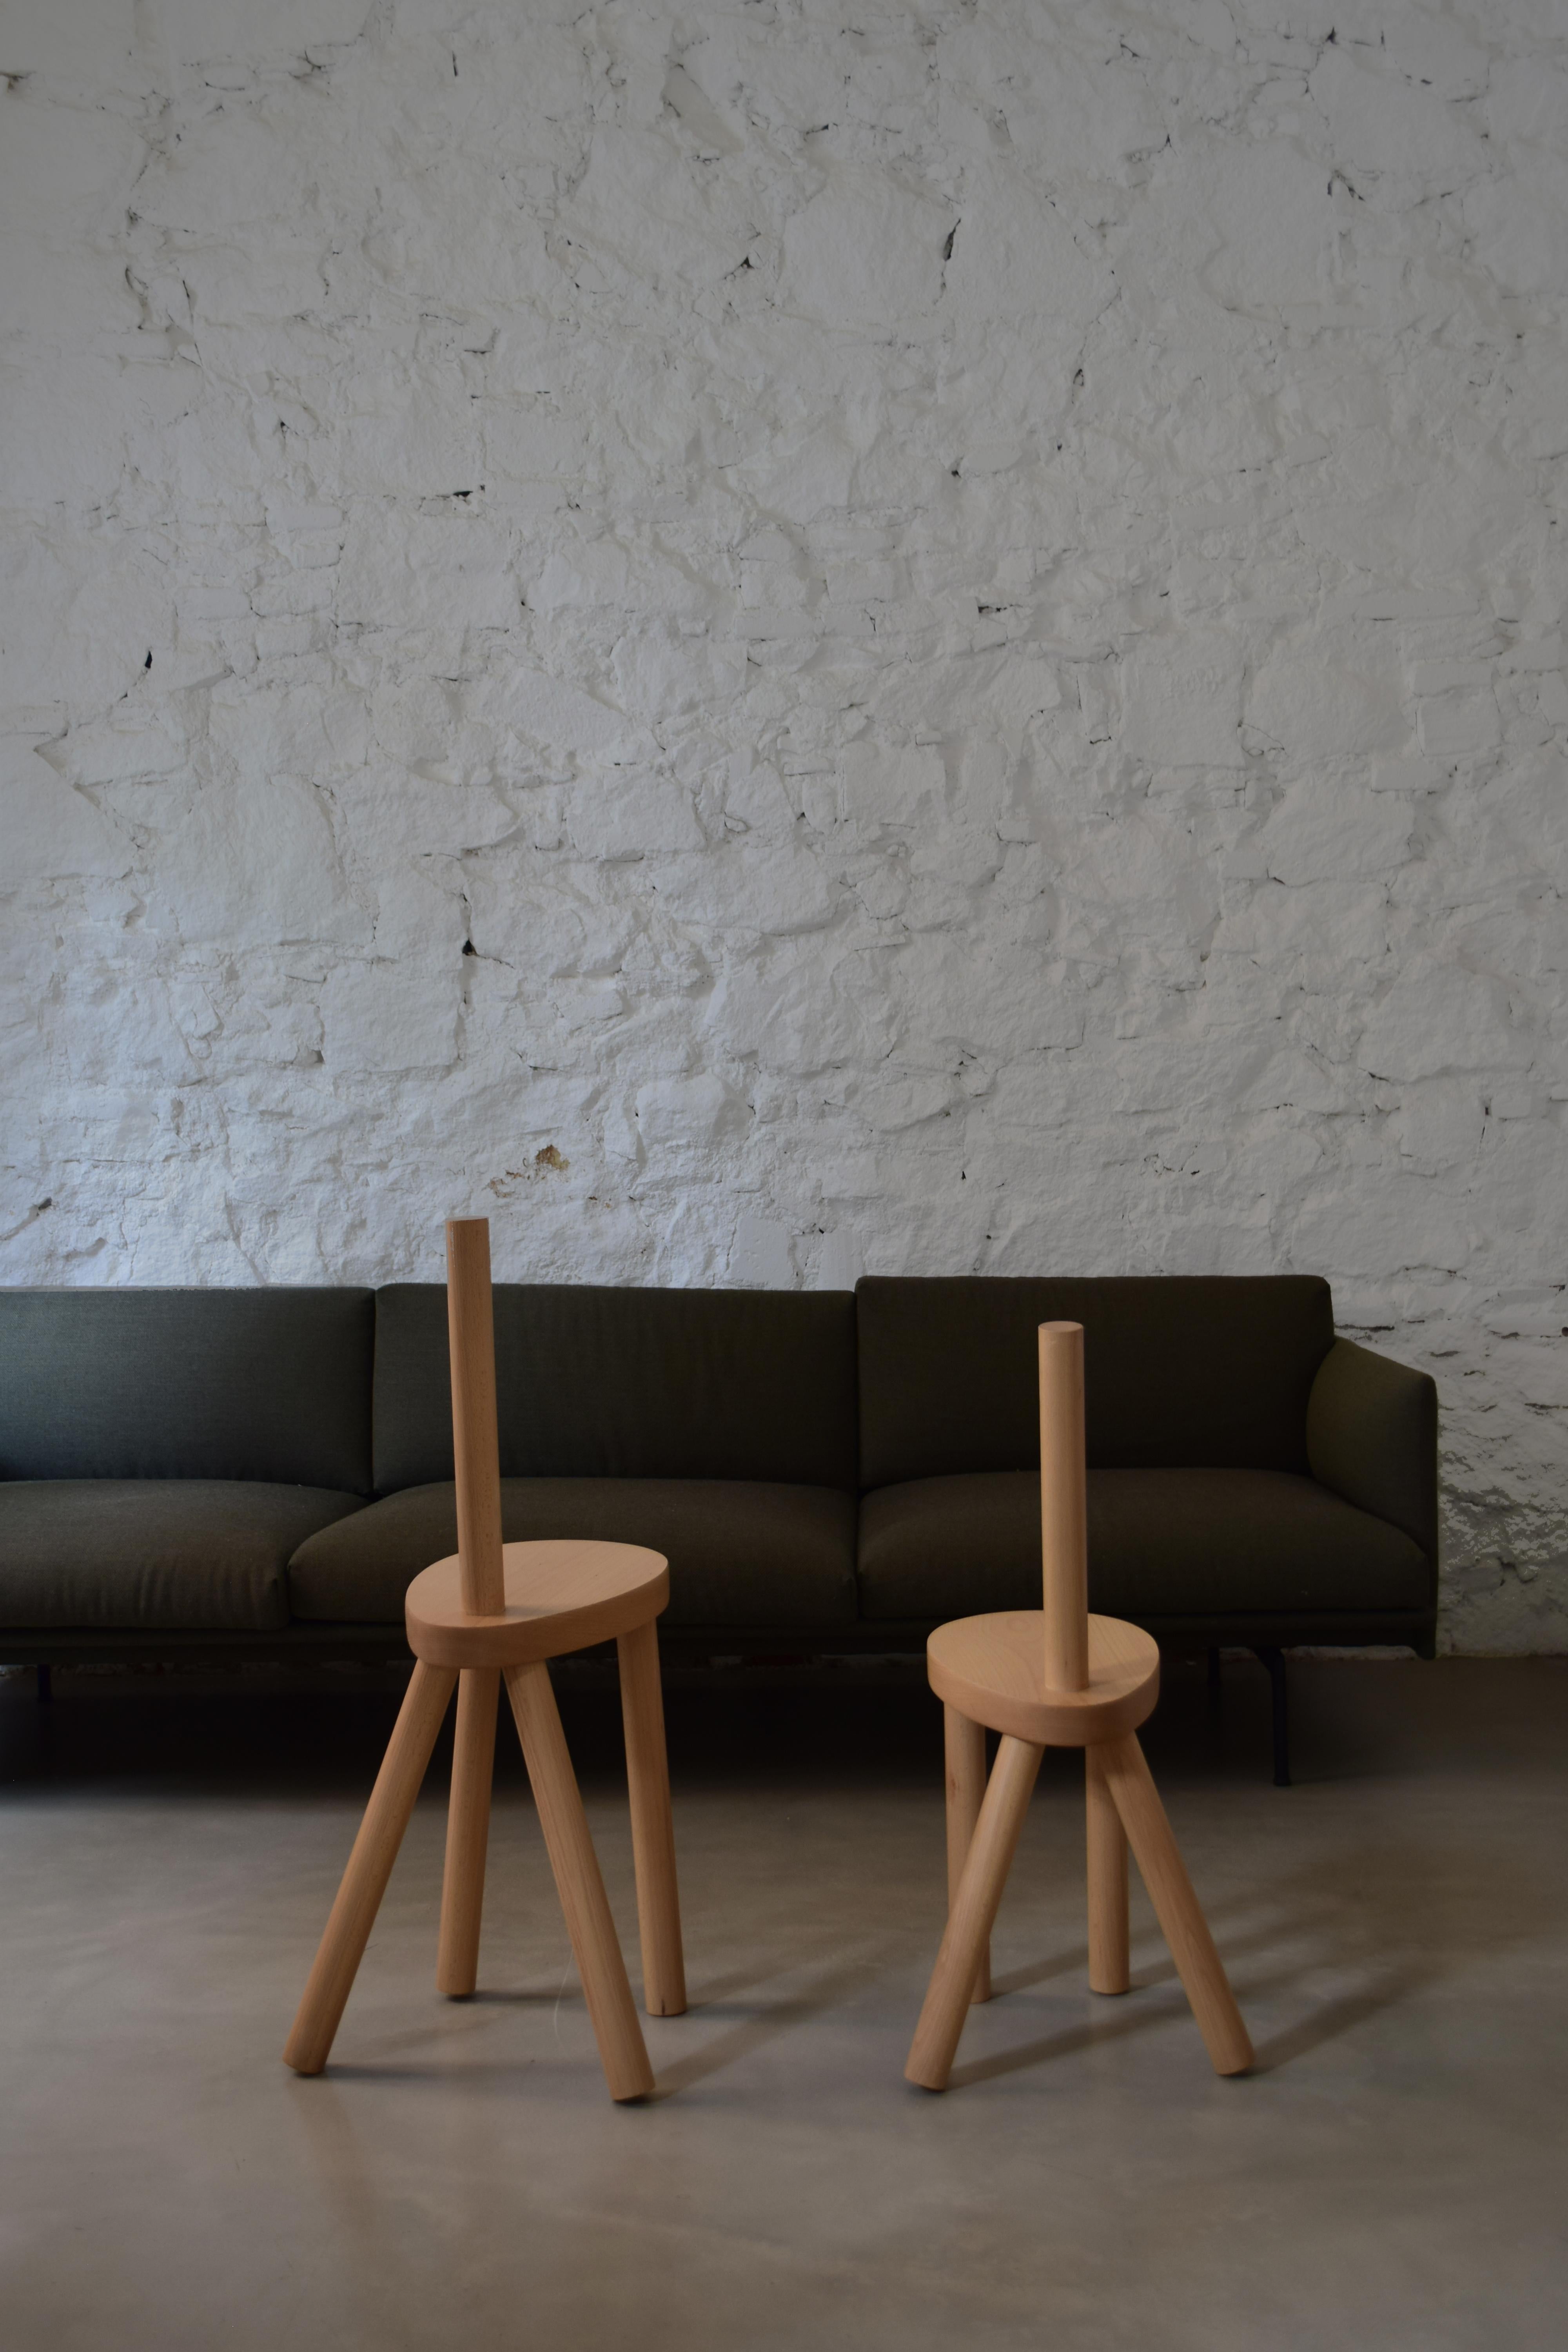 The name “Y” makes reference to the way the rear legs and the back support are placed. This simple chair leans forward in a flexible and articulated way, in a bit of a childish attitude and imitates some wooden toys and children’s sketches. When